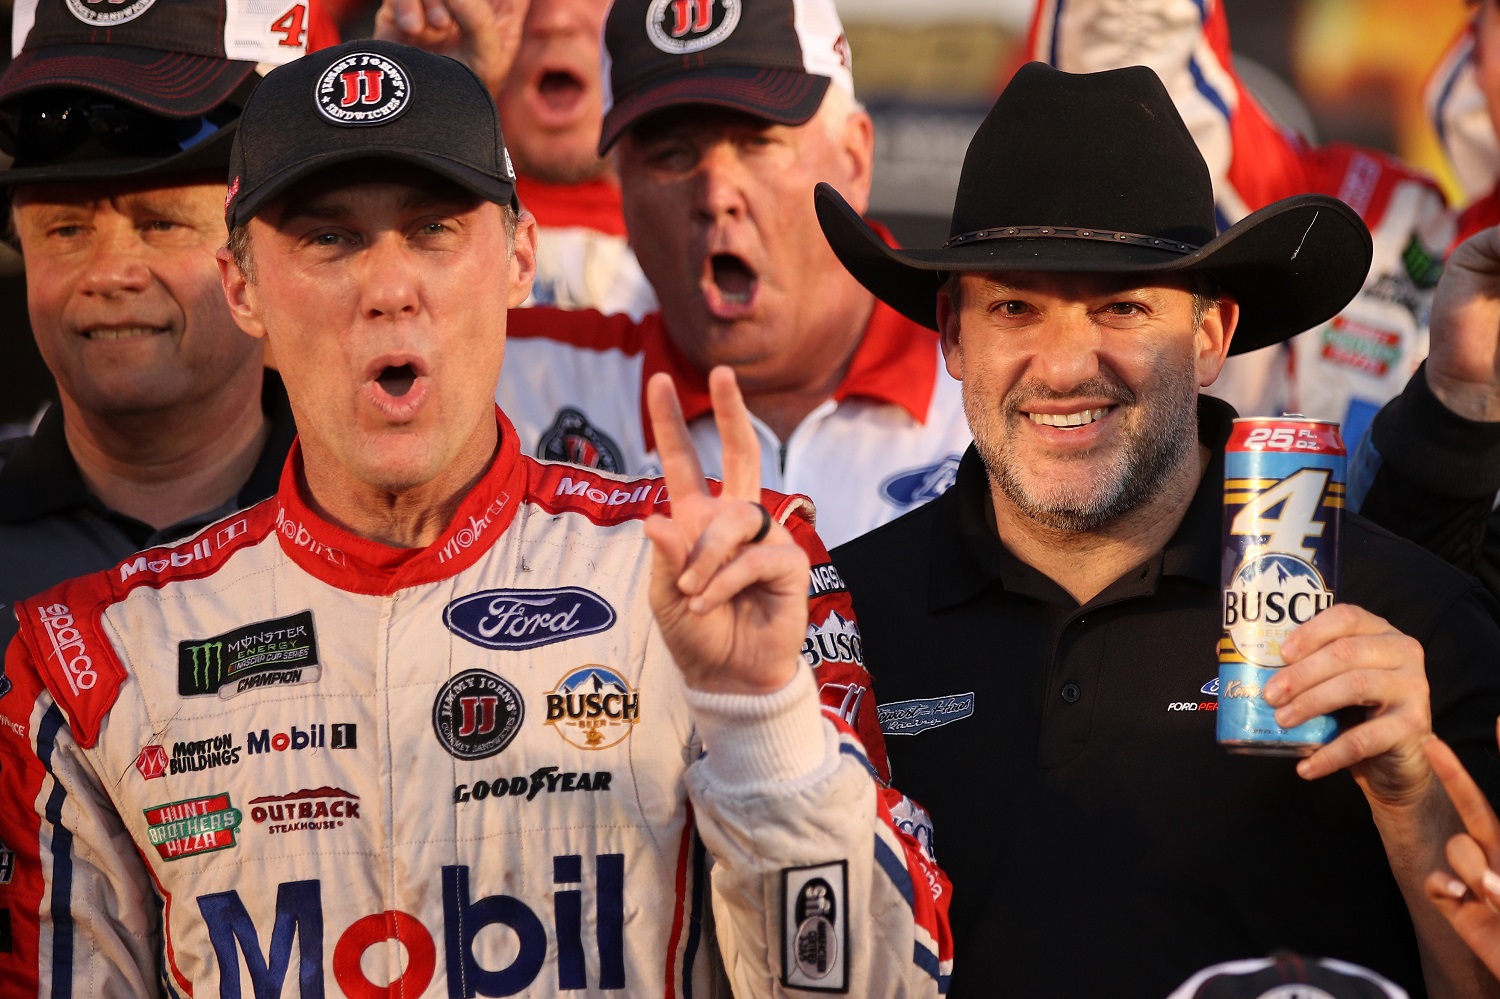 Kevin Harvick and Tony Stewart celebrate in Victory Lane after Harvick won the AAA Texas 500 at Texas Motor Speedway on Nov. 5, 2017.